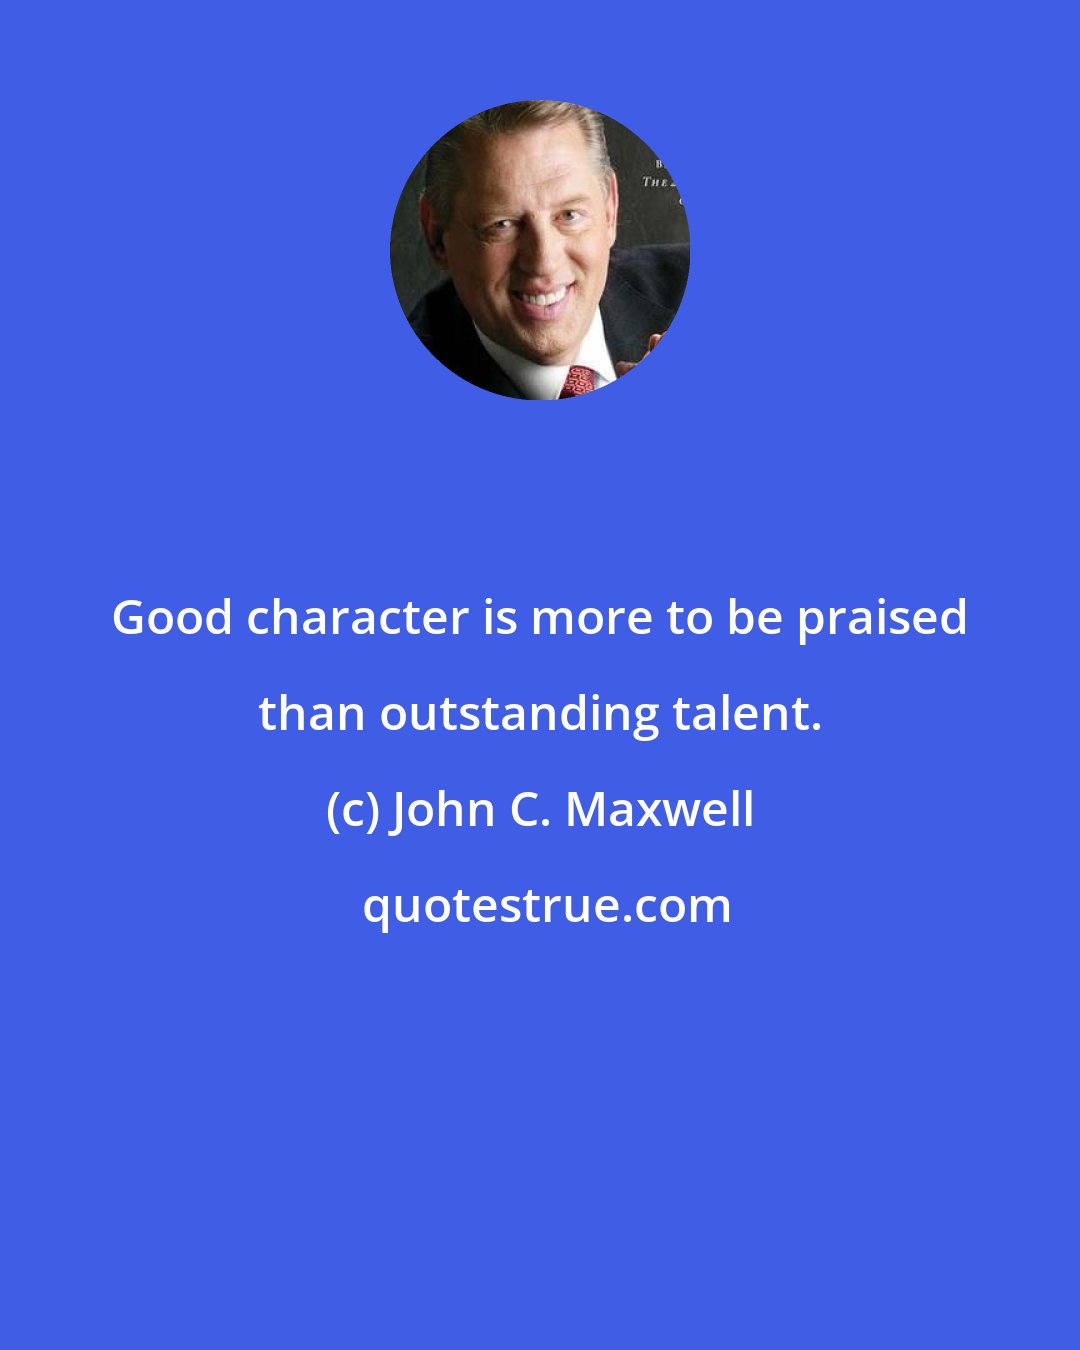 John C. Maxwell: Good character is more to be praised than outstanding talent.